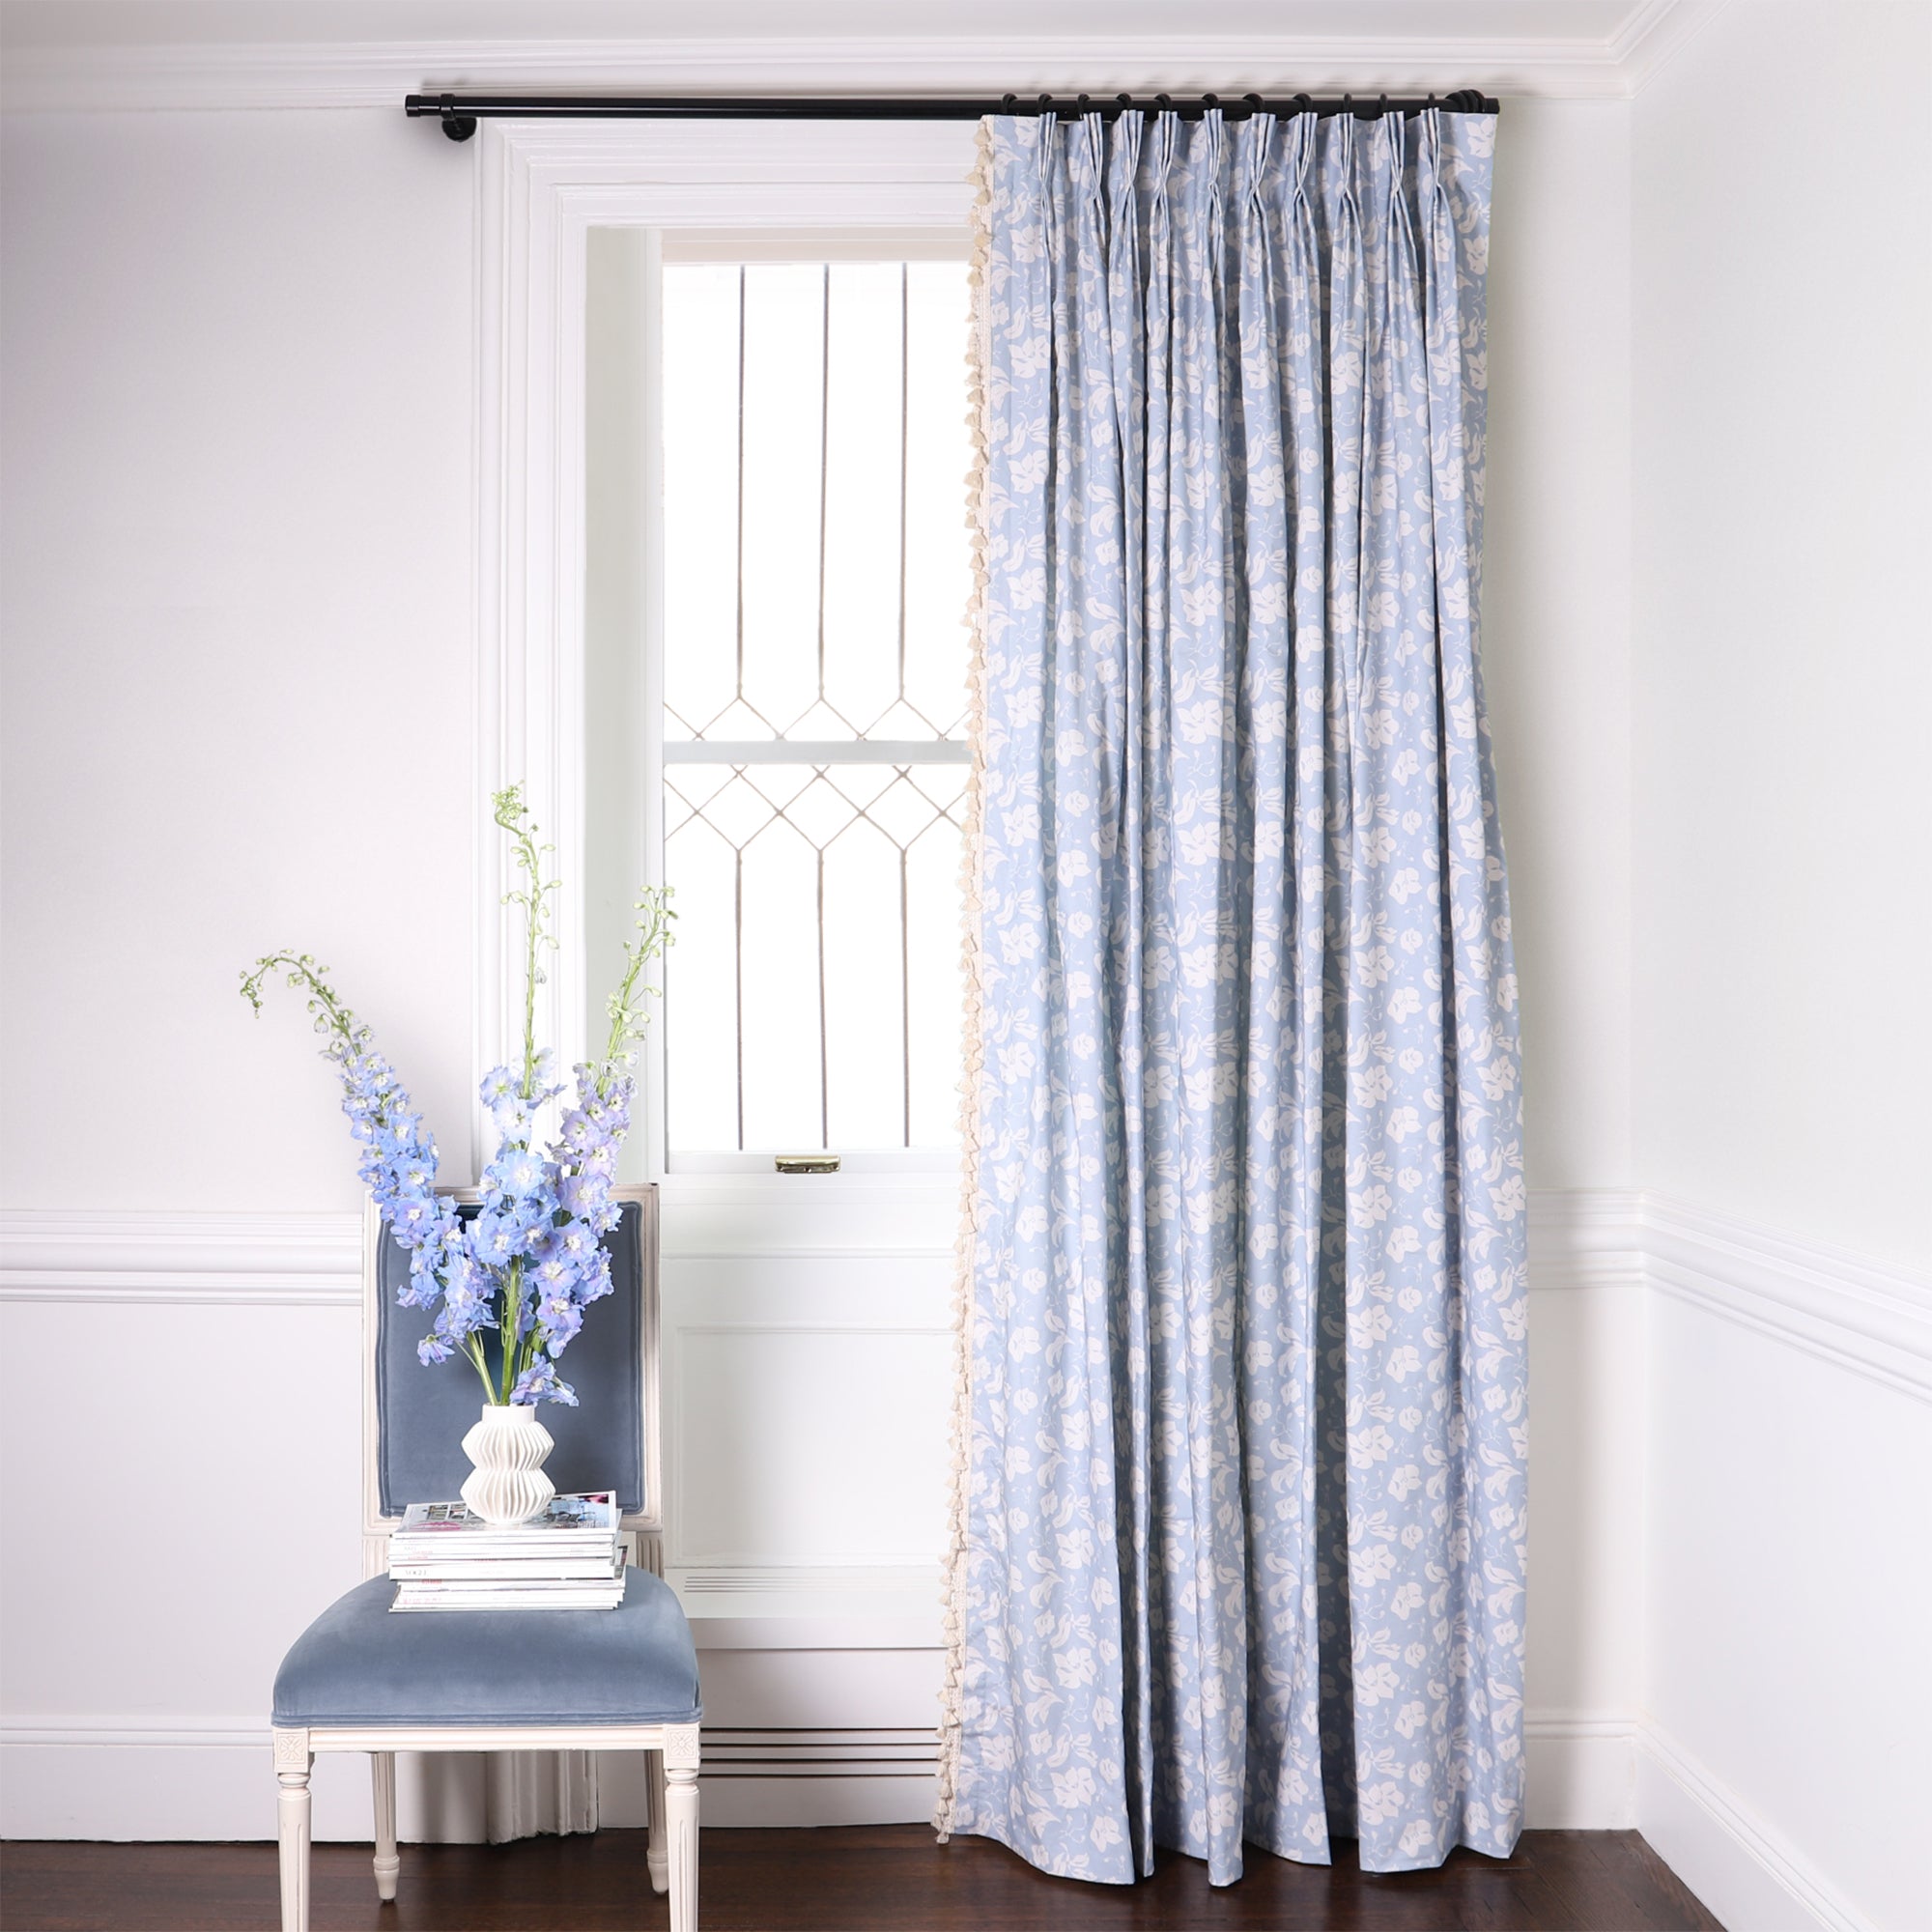 Cornflower blue floral custom curtain hanging on window in room with white walls and blue chair